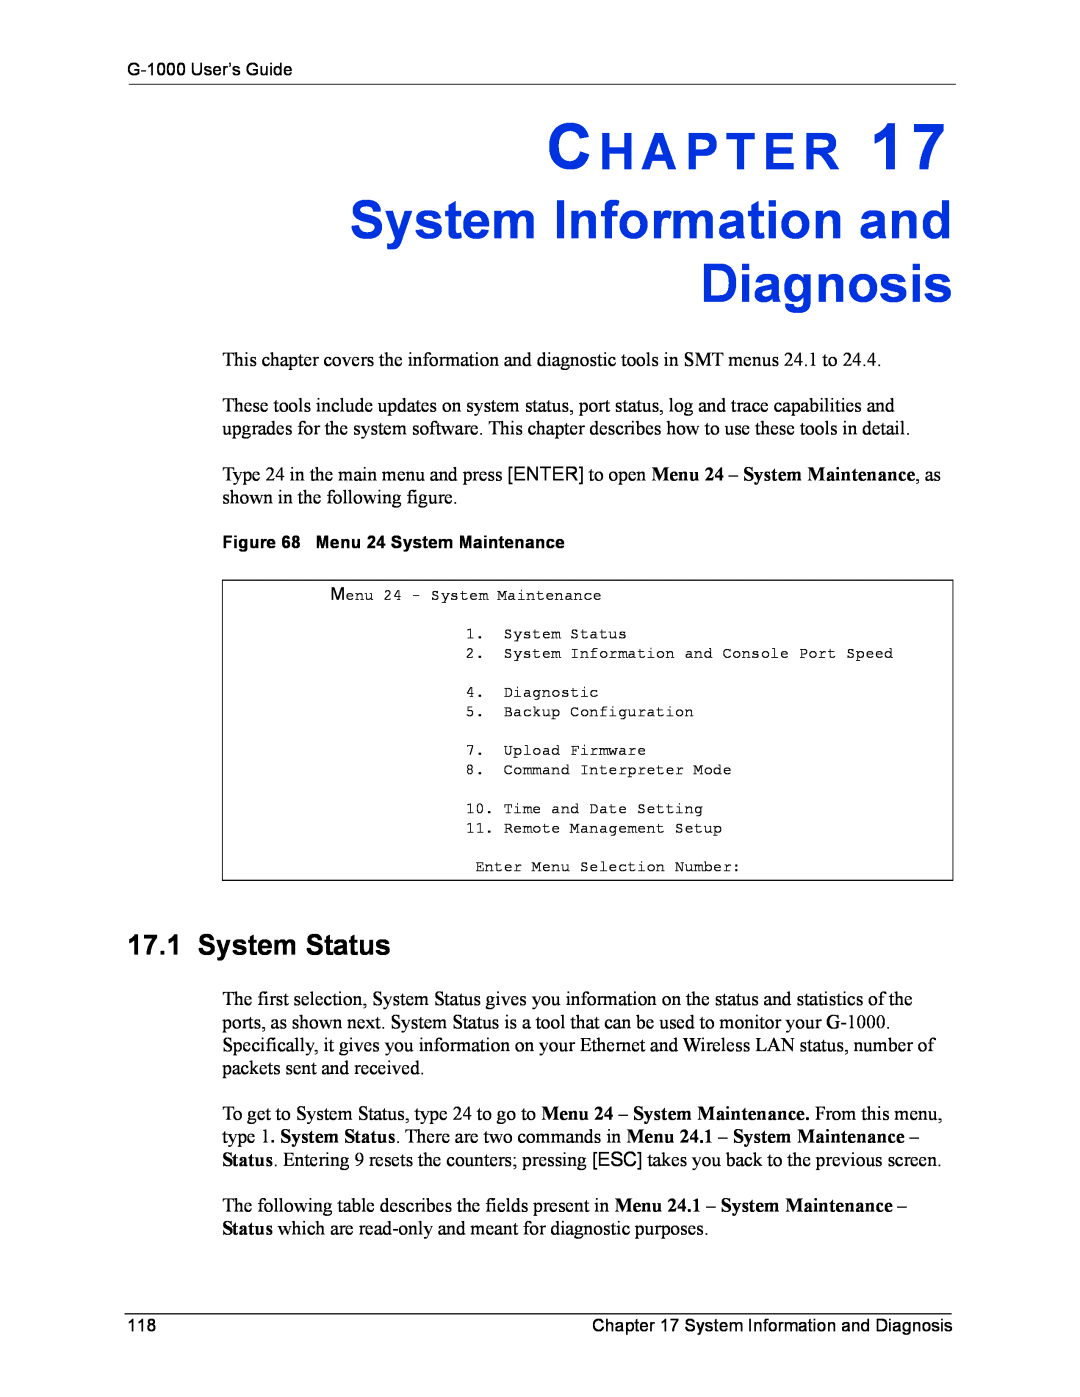 ZyXEL Communications G-1000 manual System Information and Diagnosis, System Status, Ch A P T E R 